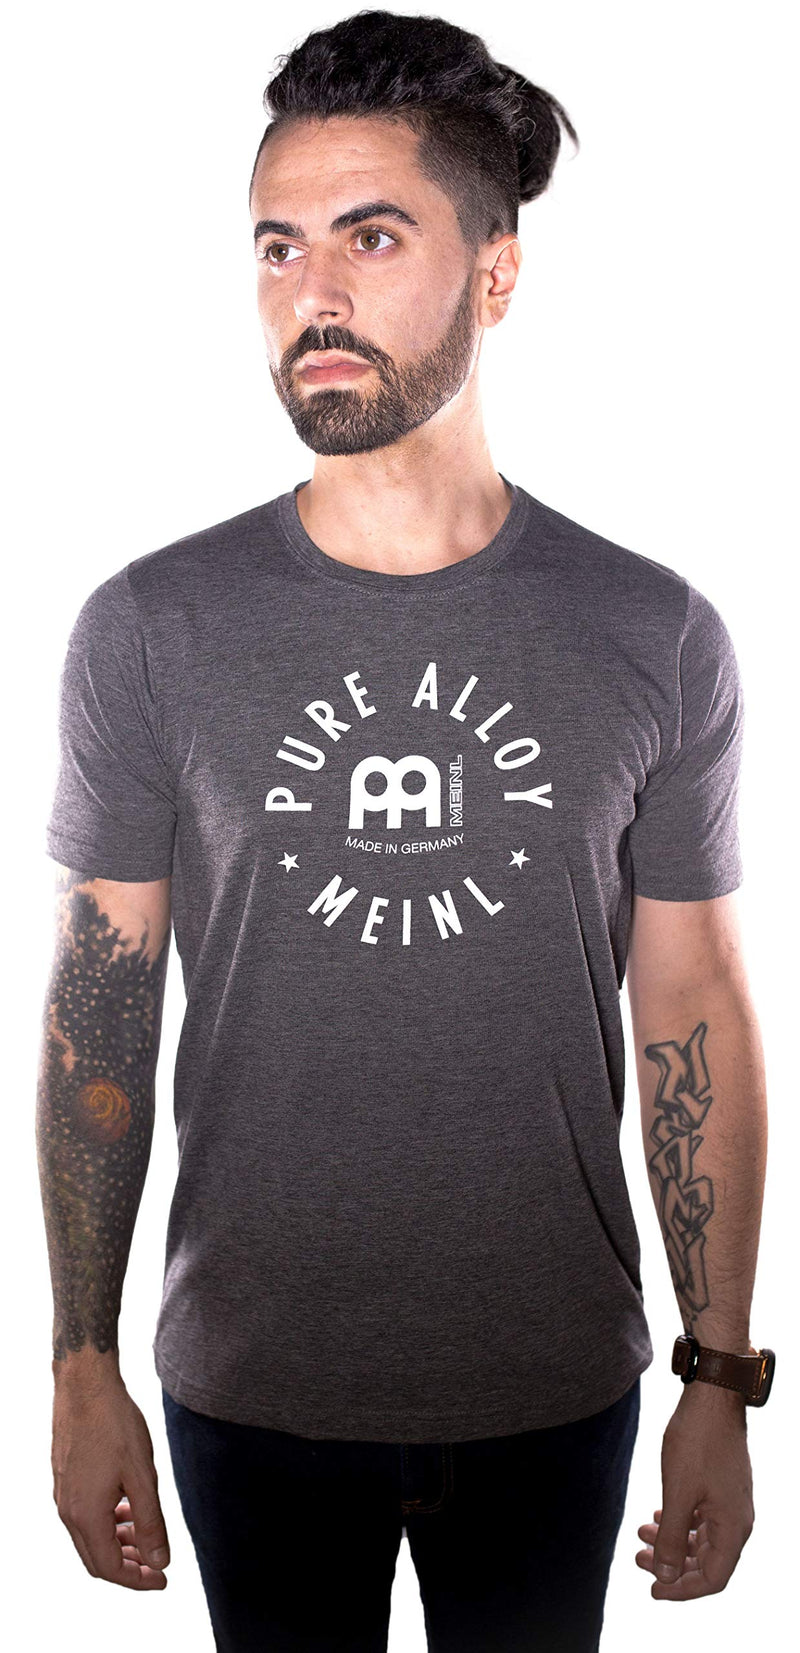 Meinl Cymbals Pure Alloy Logo T-Shirt, Charcoal, Small (S76-S)